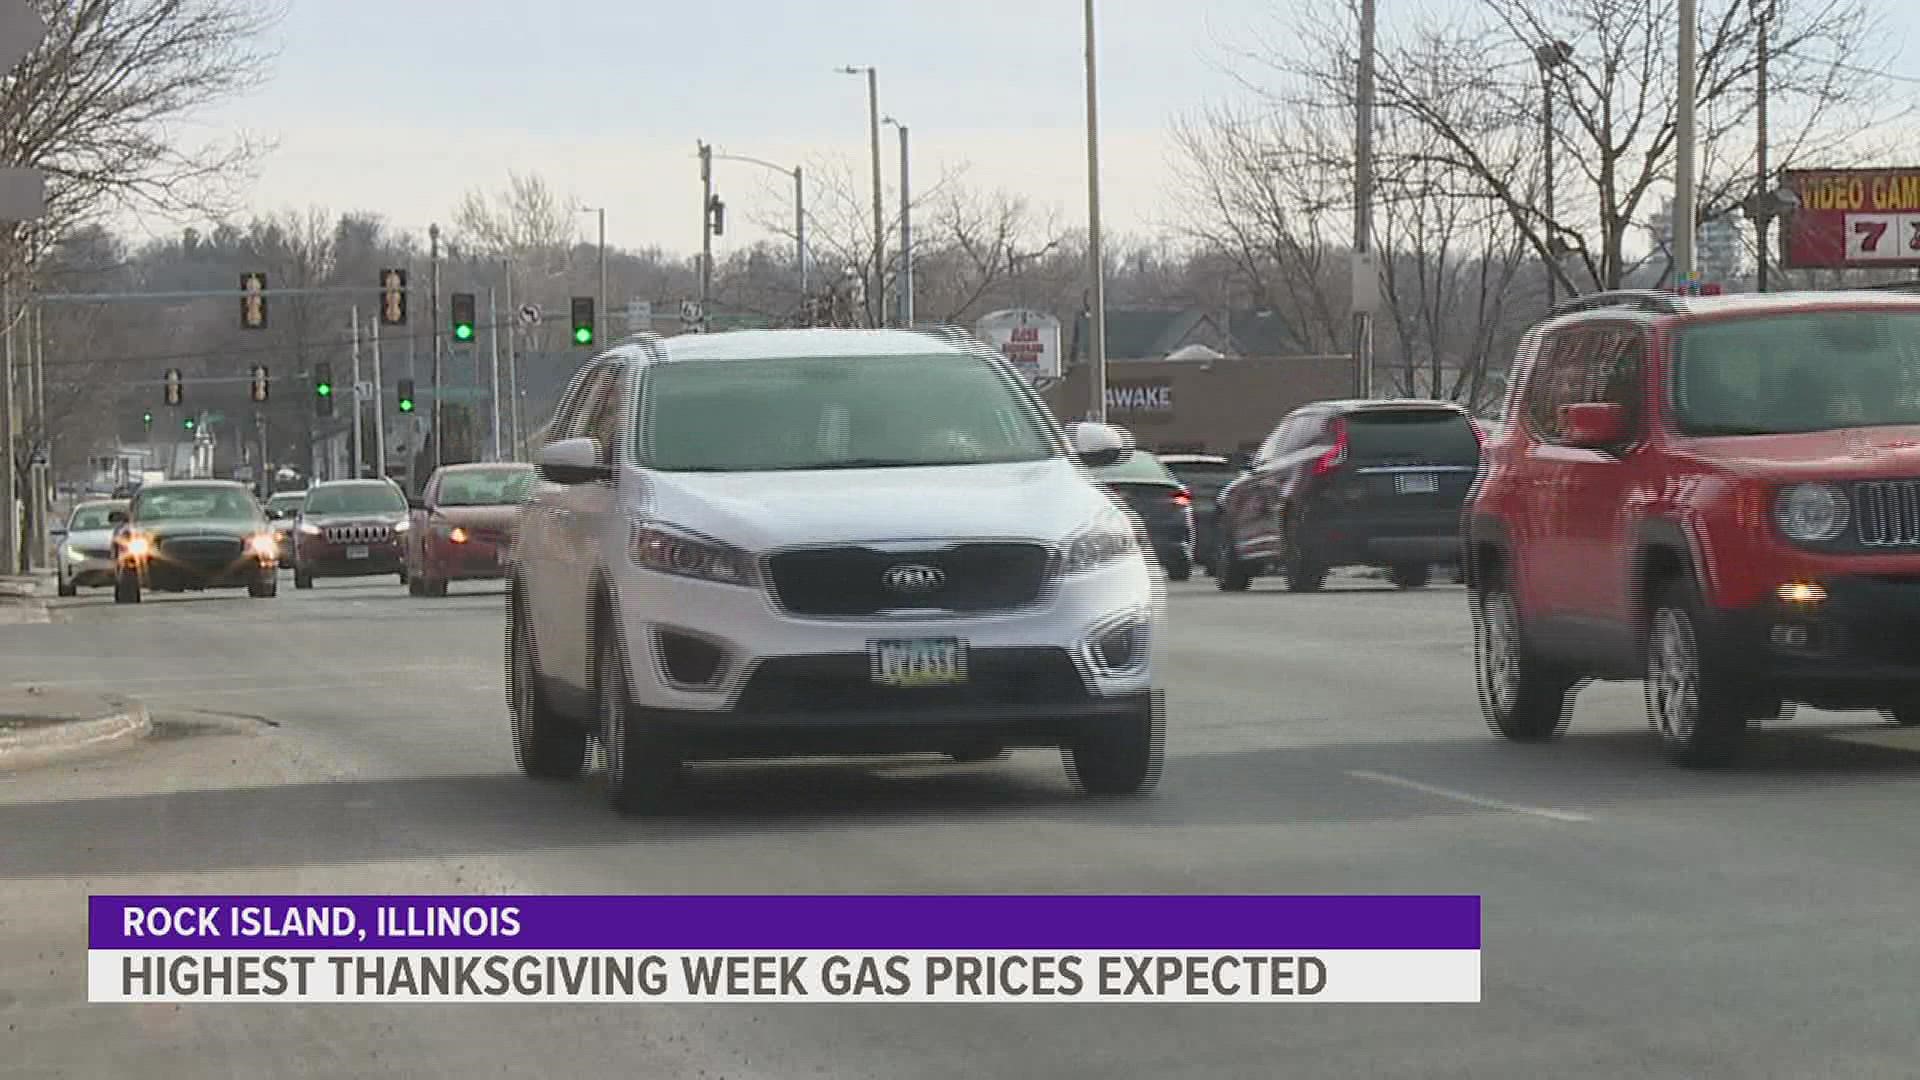 Even as gas prices continue to decrease, AAA officials predict that the 2022 Thanksgiving travel season will be the most expensive they've ever seen.